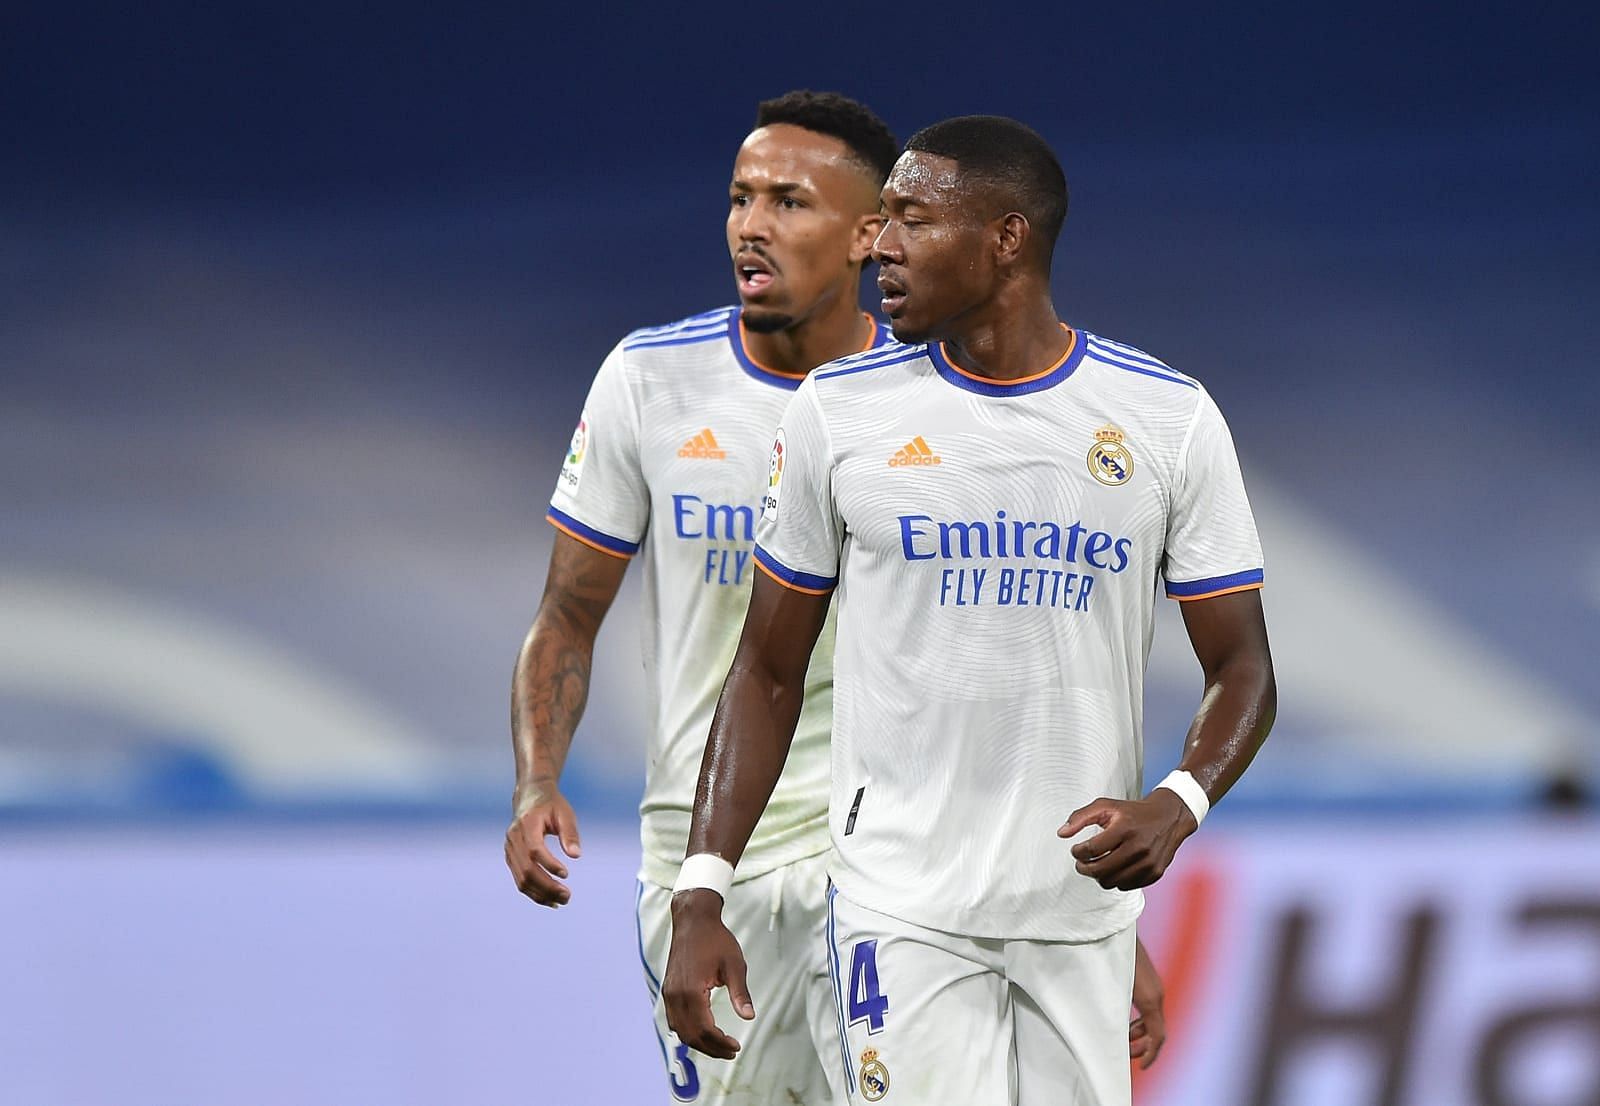 Eder Miliao and David Alaba of Real Madrid